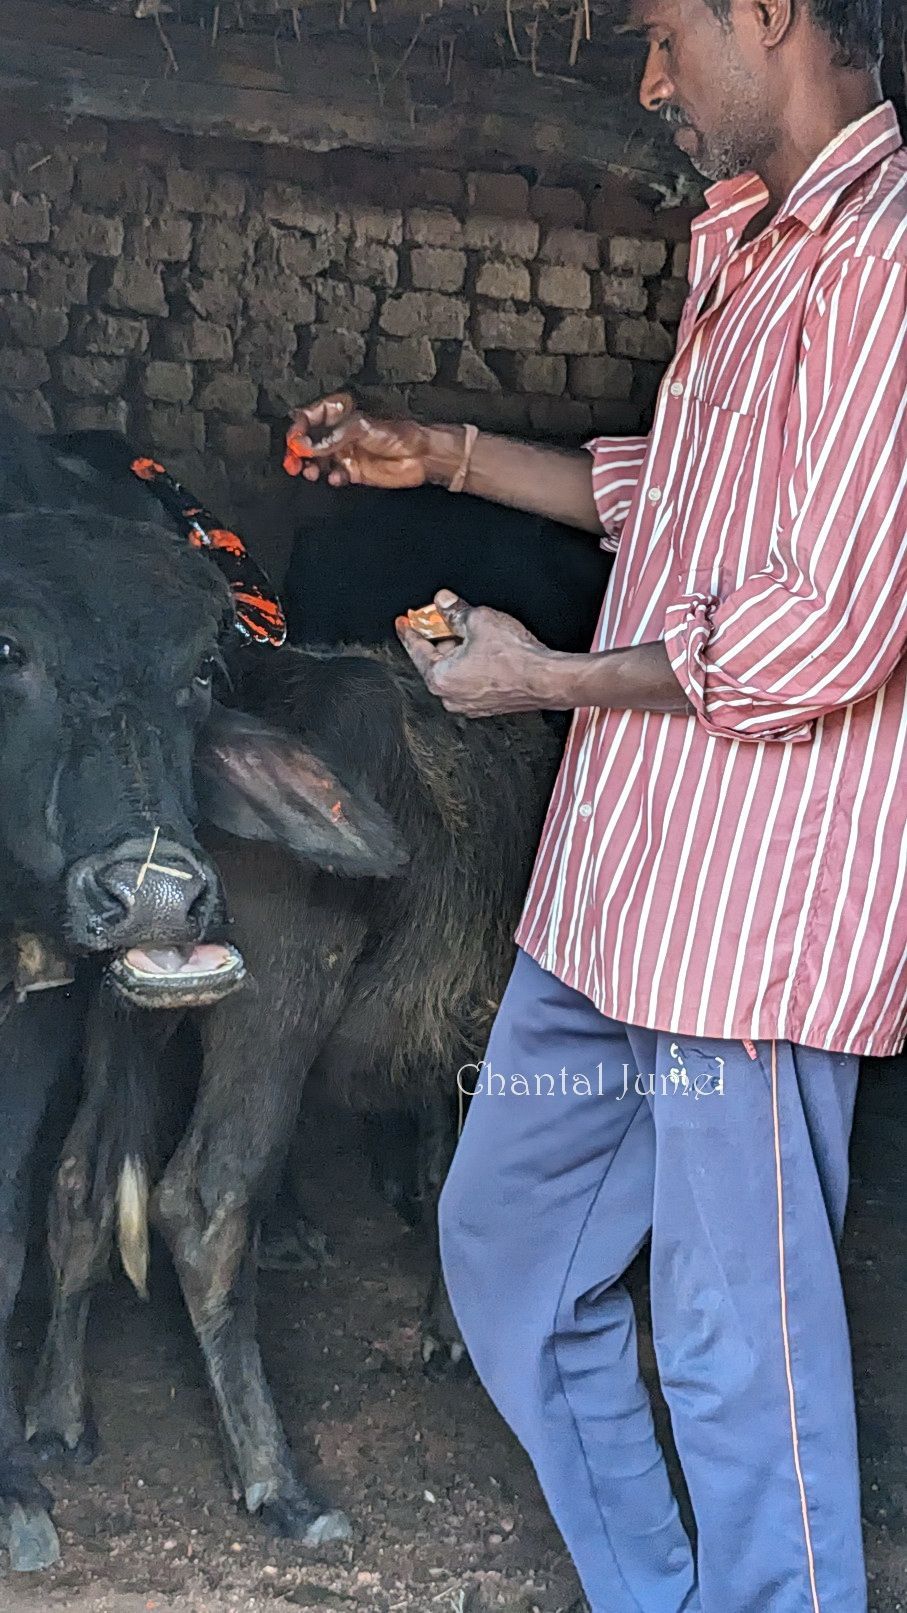 Jharkhand, Sohrai festival "Painting aripan to welcome the cattle"  — part 5